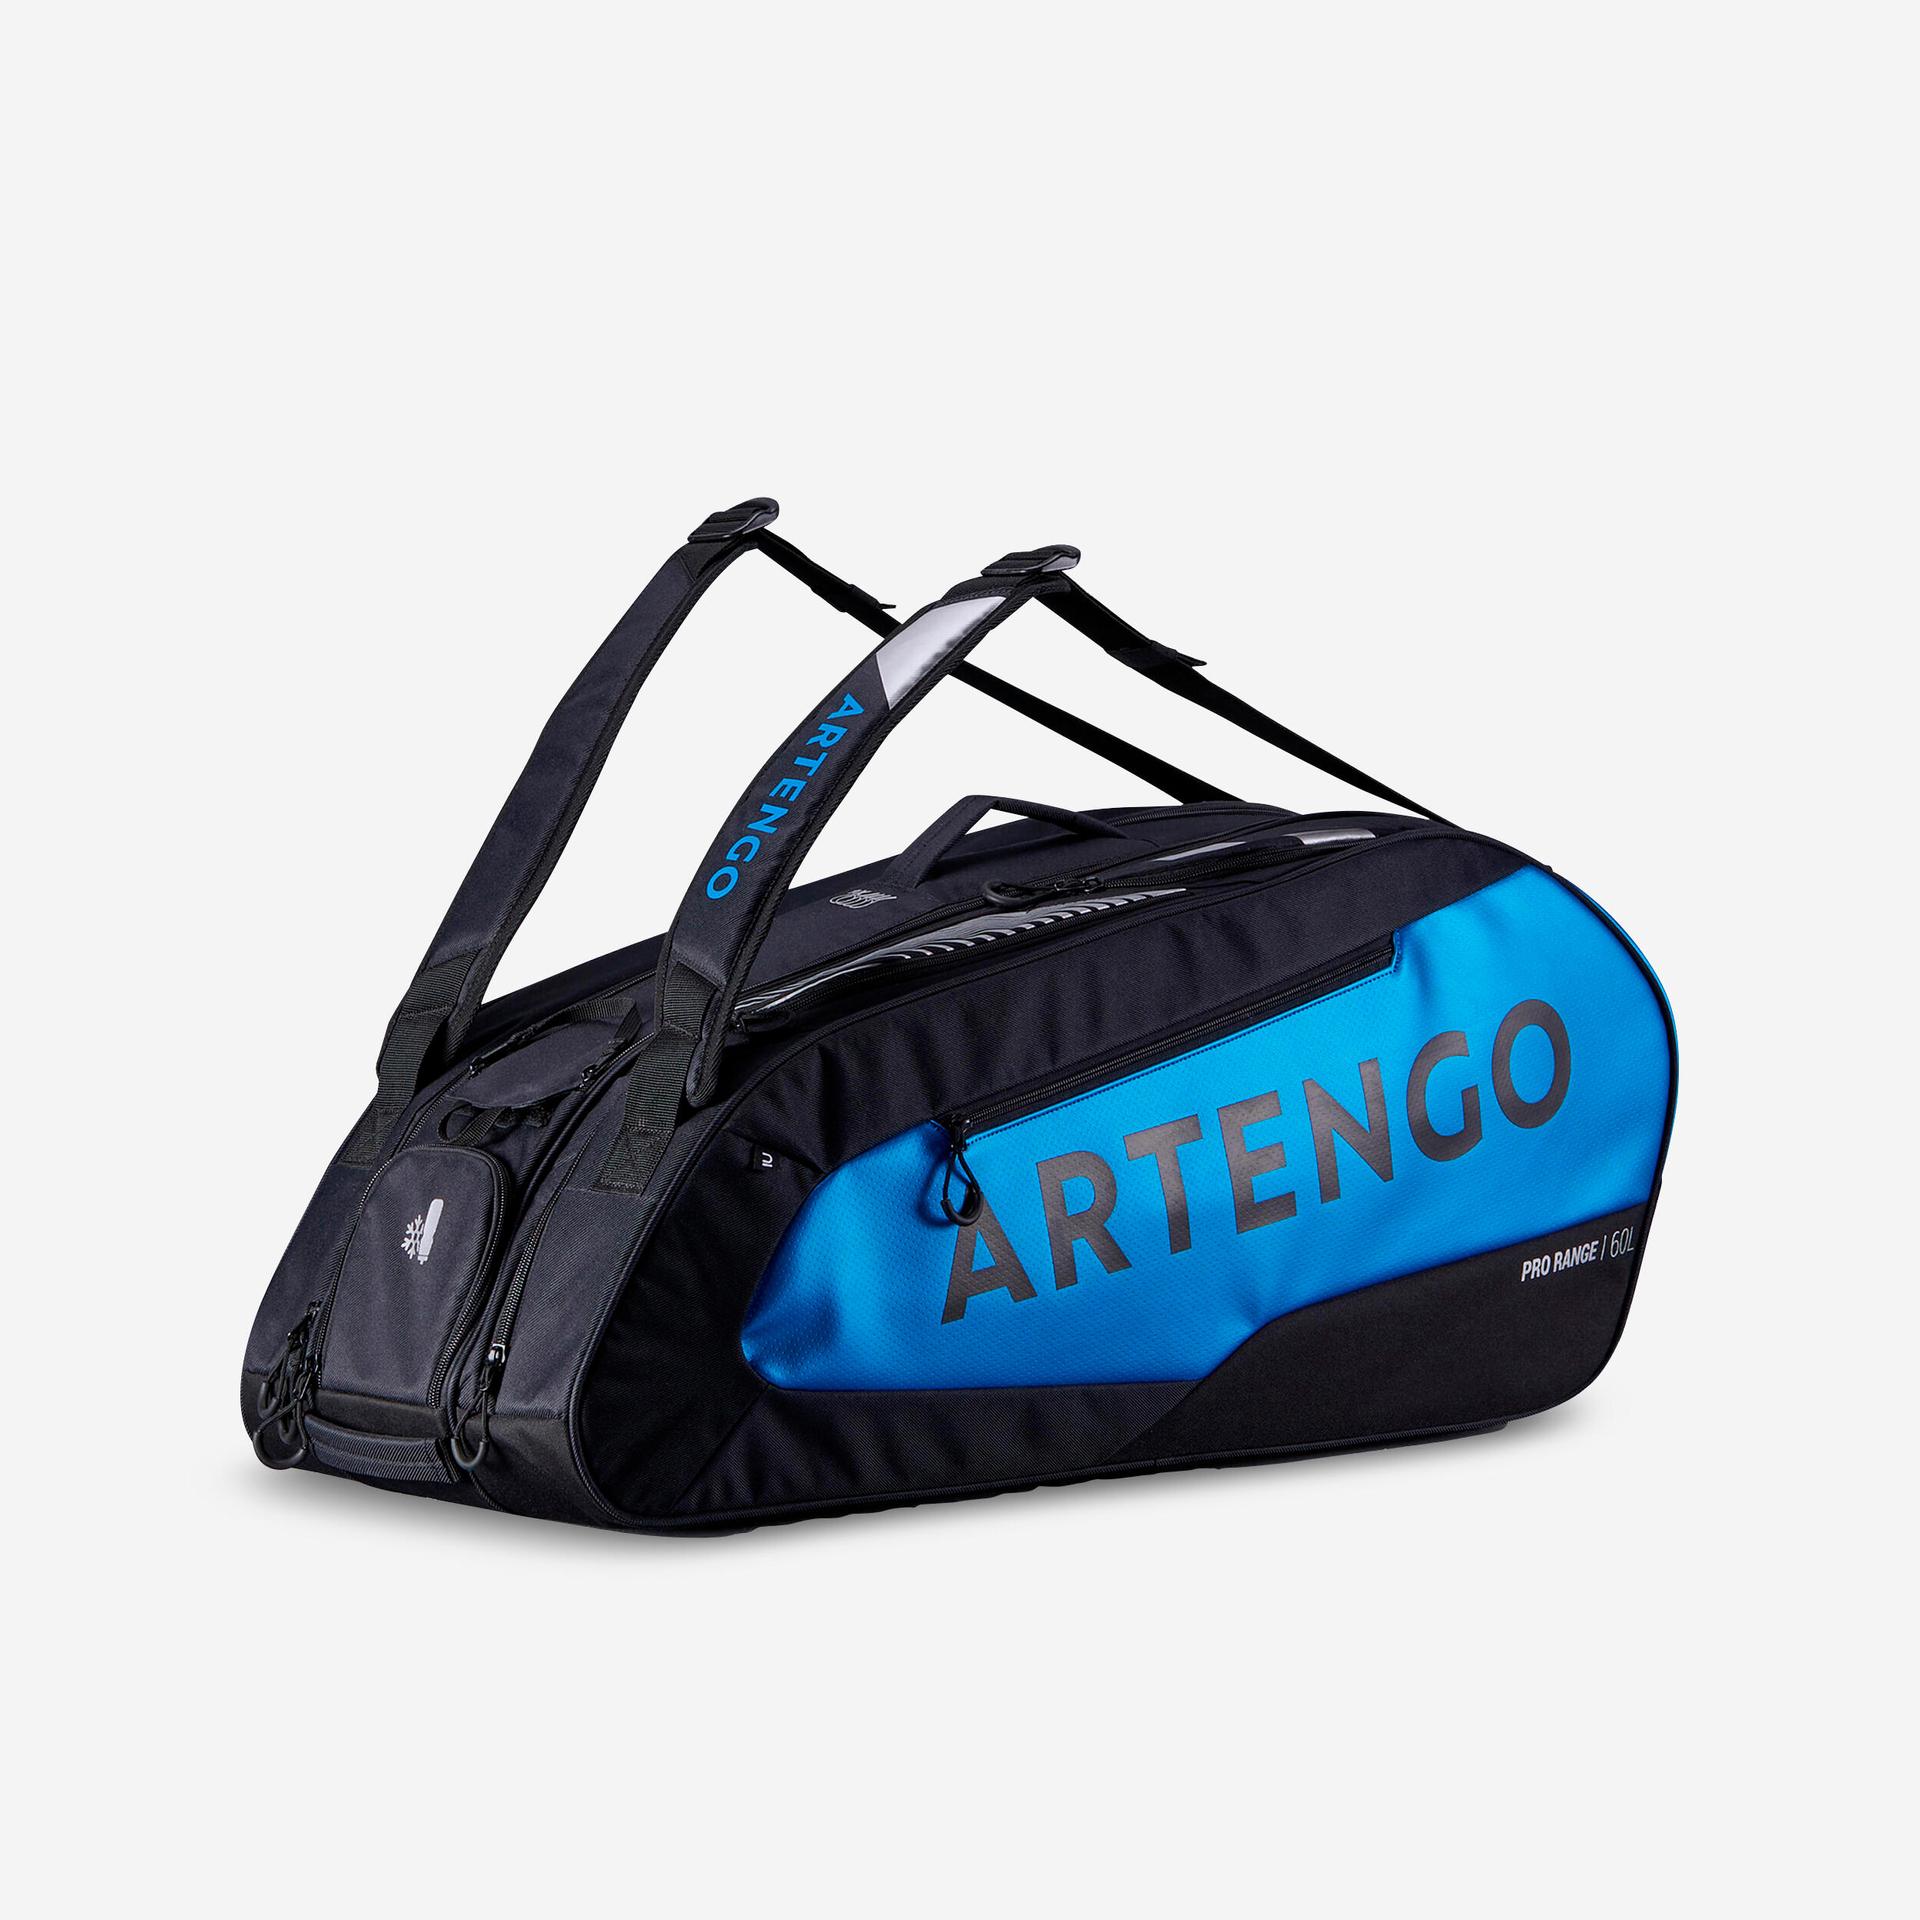 insulated-9-racket-tennis-bag-l-pro---blue-spin